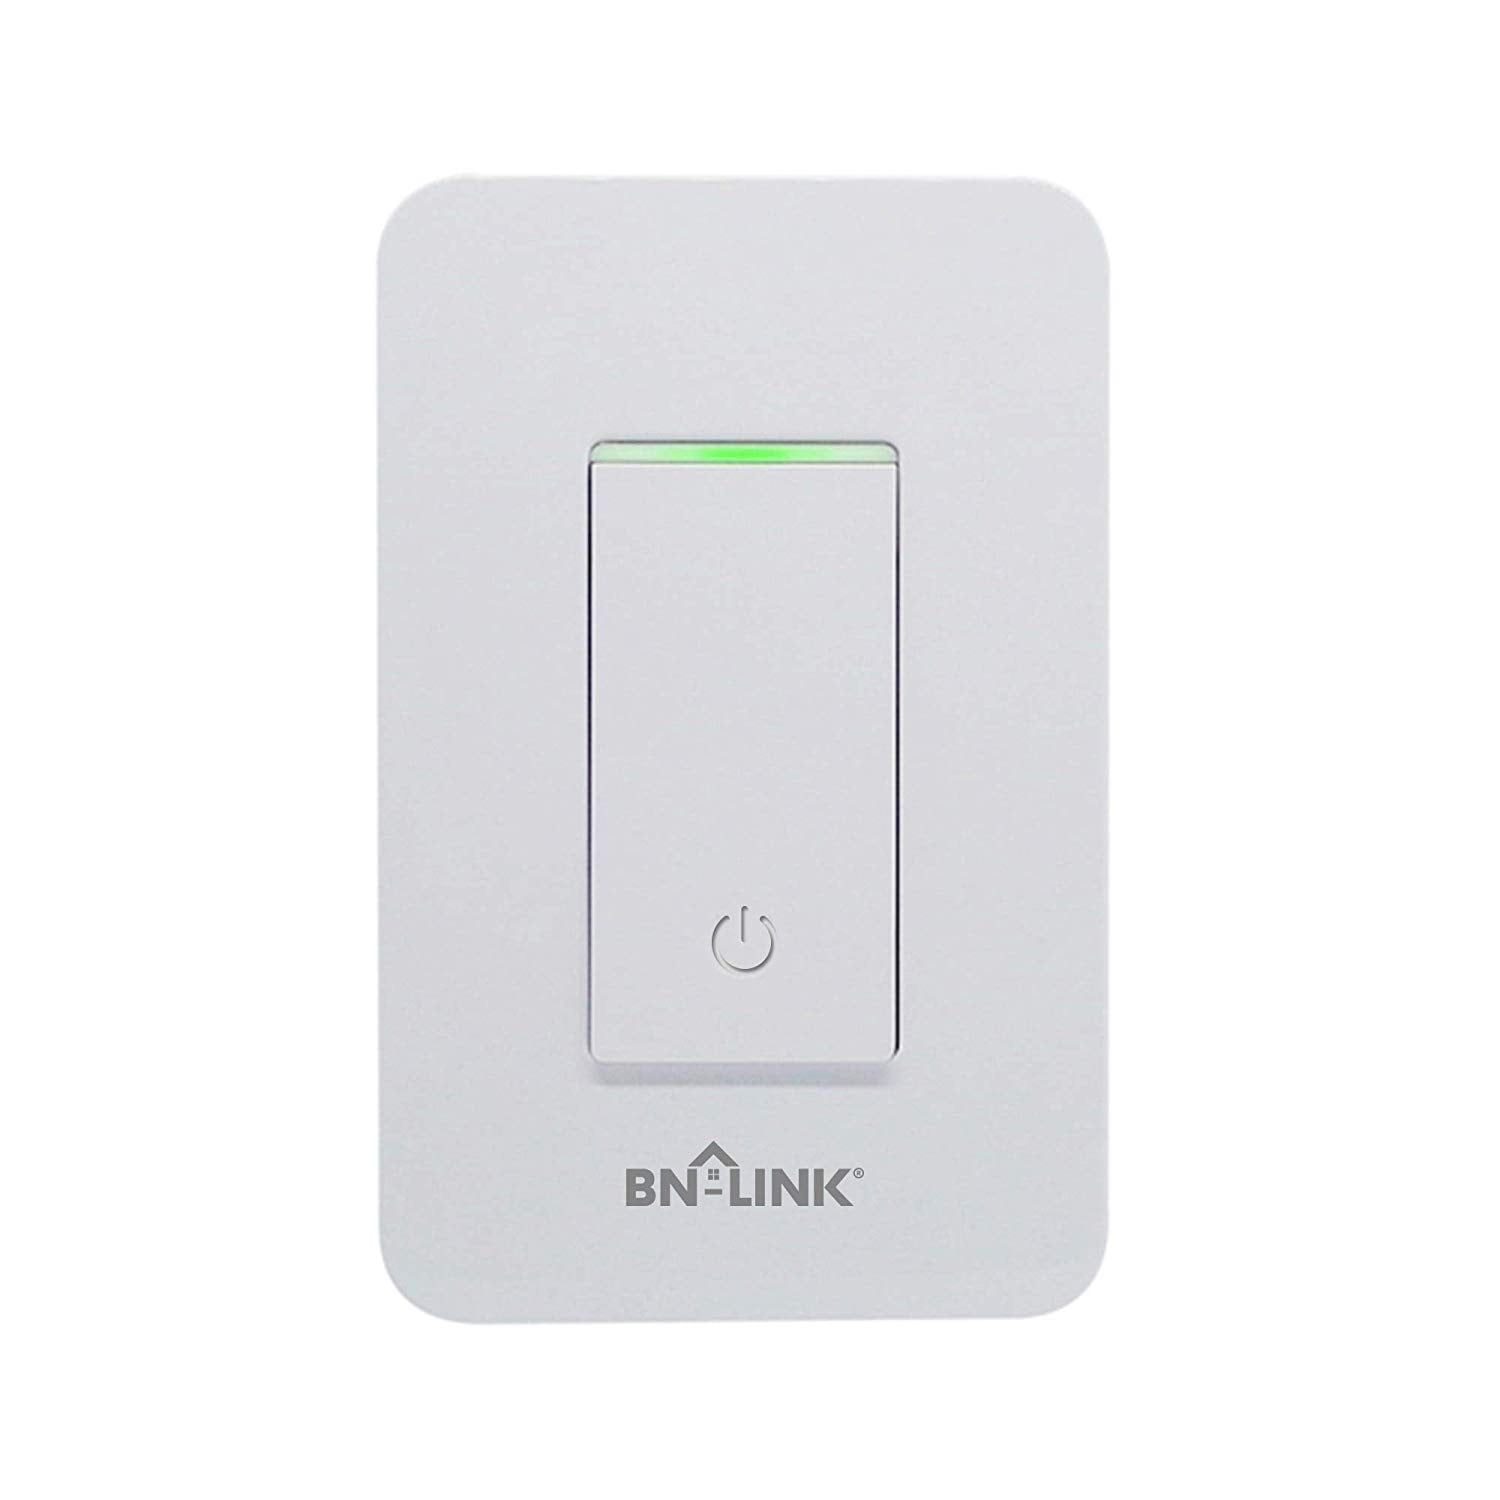 Remote Control TESSAN 2.4GHz WiFi Light Switch Compatible with Alexa and Google Home Schedule Timer for Lights 3 Way Smart Switch Neutral Wire Required